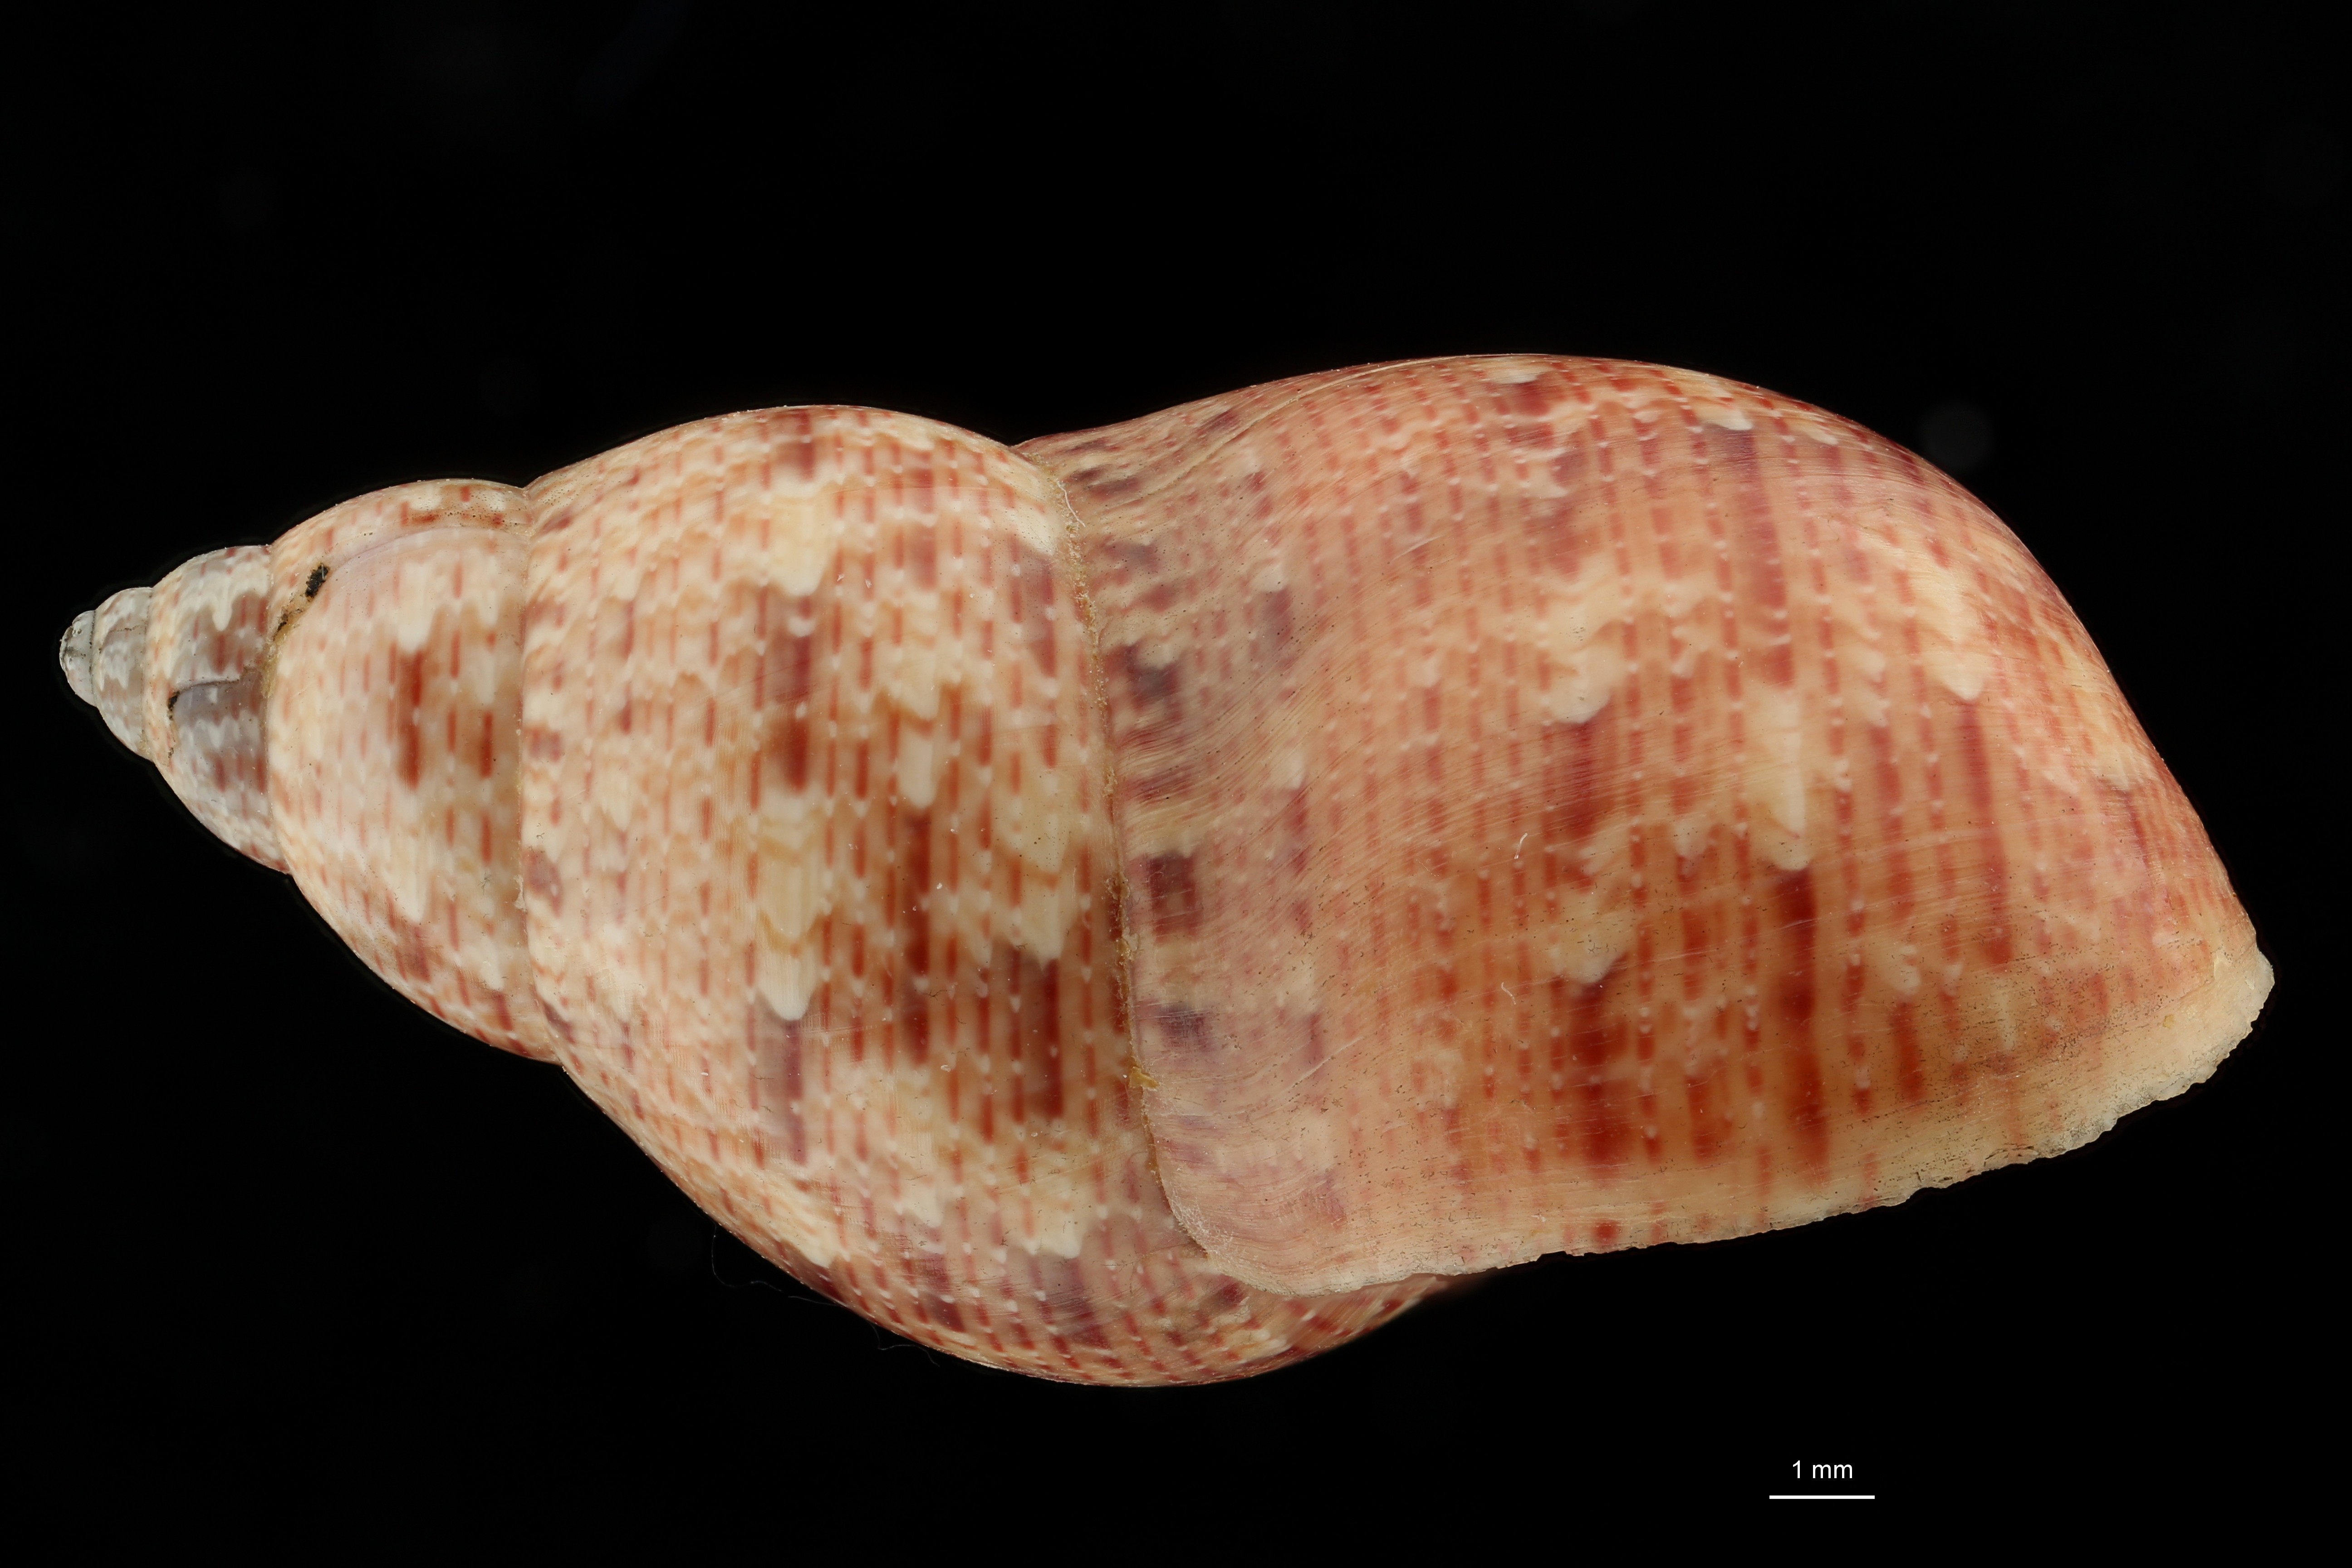 BE-RBINS-INV HOLOTYPE MT 40 Phasianella montebelloensis LATERAL ZS DMap Scaled.jpg